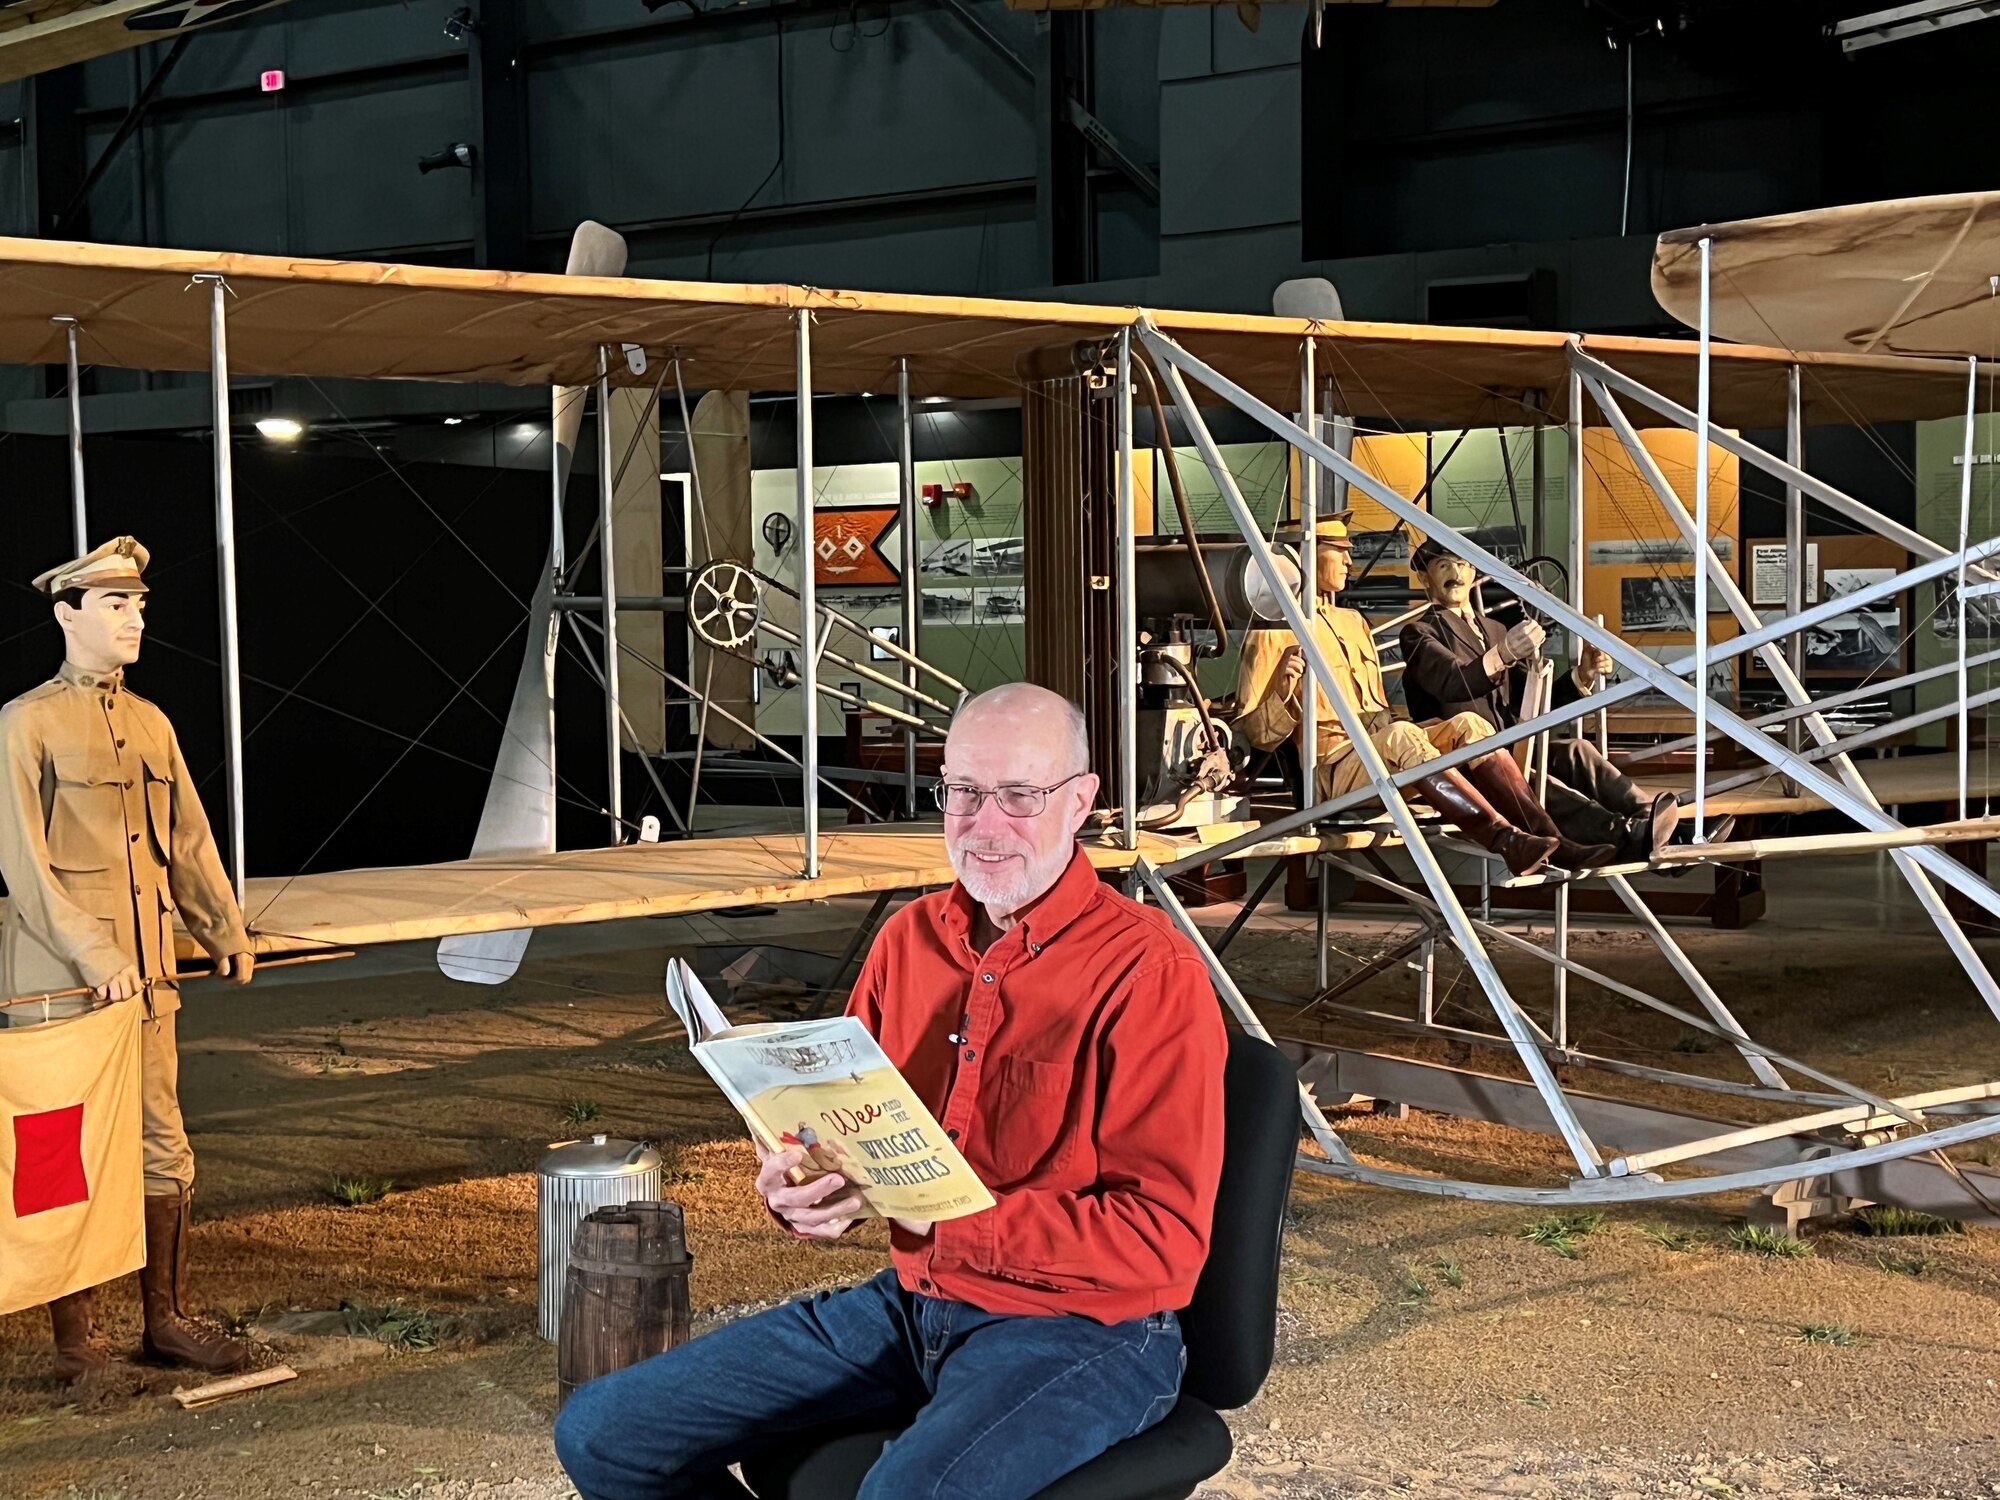 Guest reader sit in front of aircraft in the museum as they read books for virtual Read Across America.